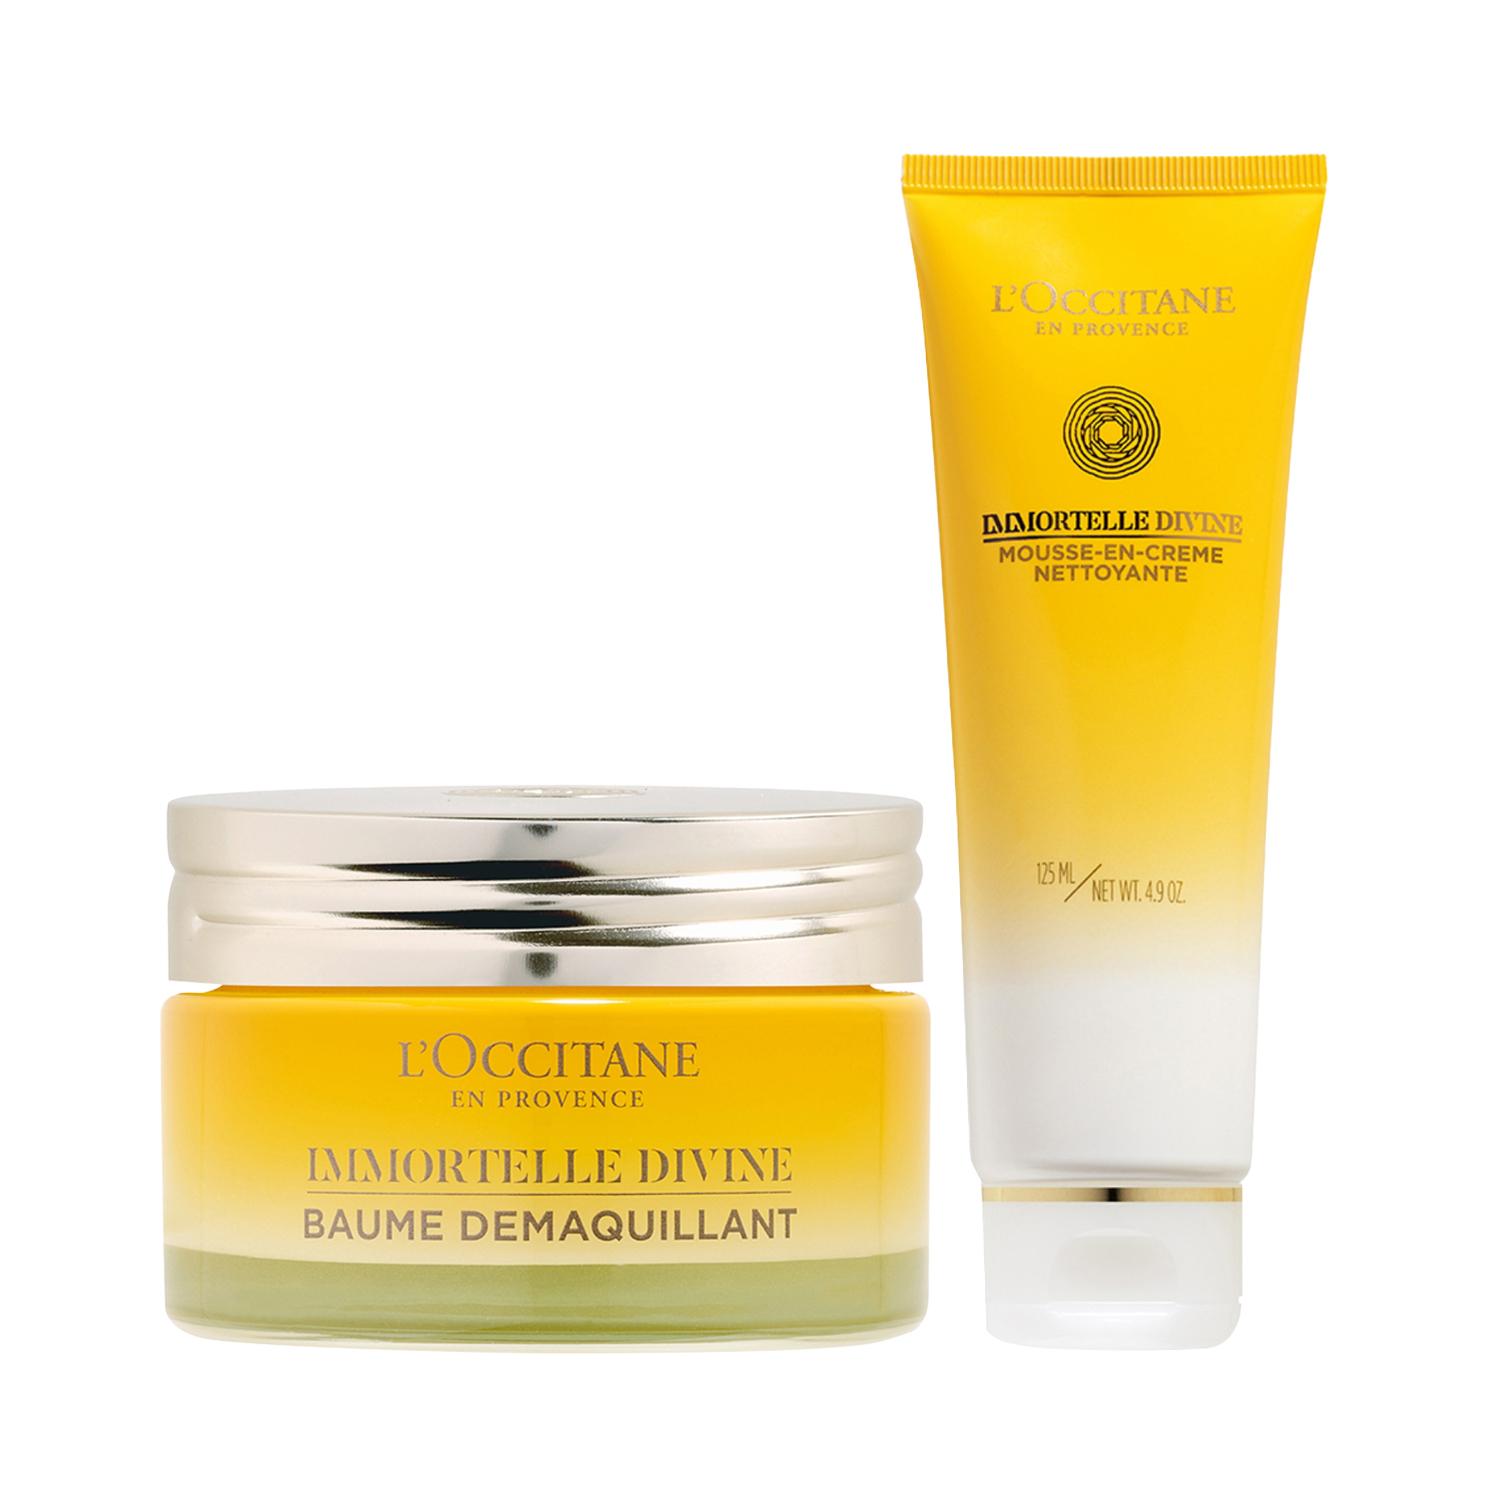 L'occitane | L'occitane Immortelle Divine Double Cleansing Duo Cleansing Balm & Foaming Cleanser Combo